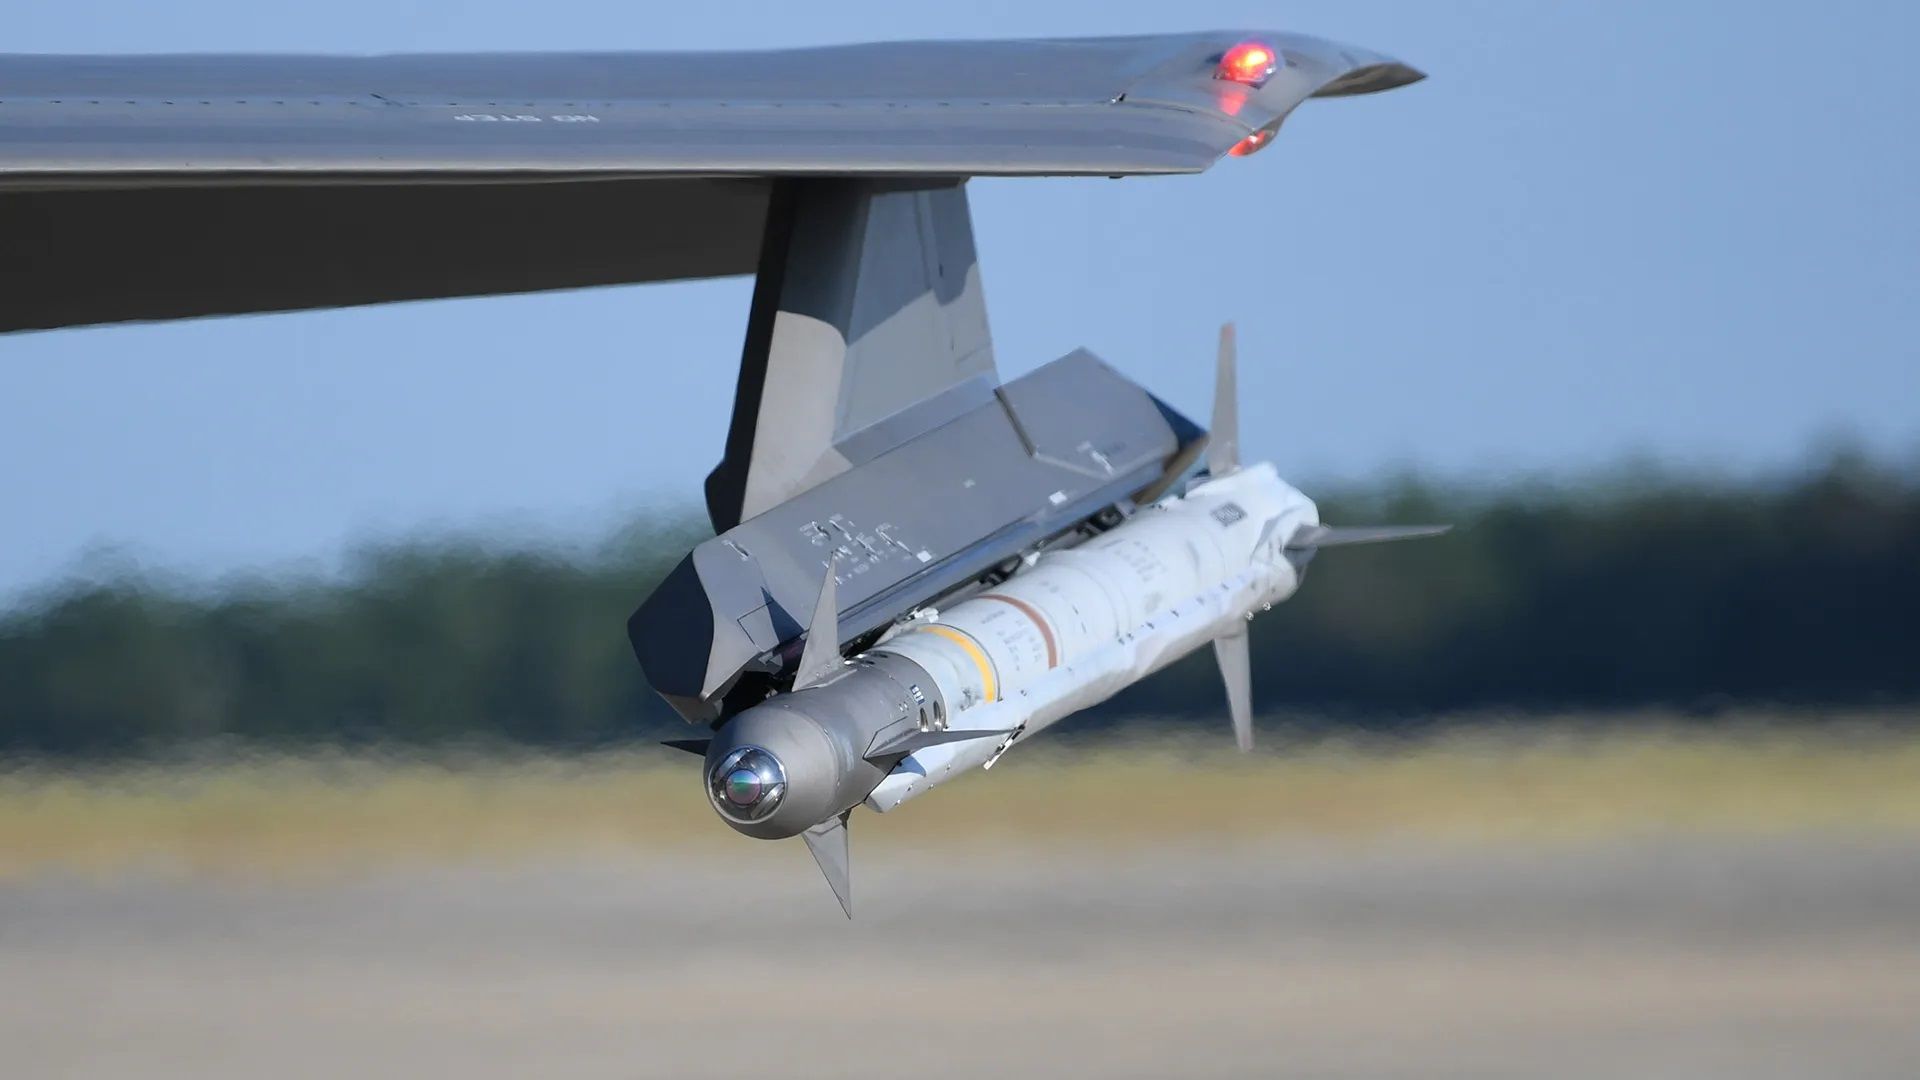 The Netherlands to Acquire AIM-9x Block II Missiles